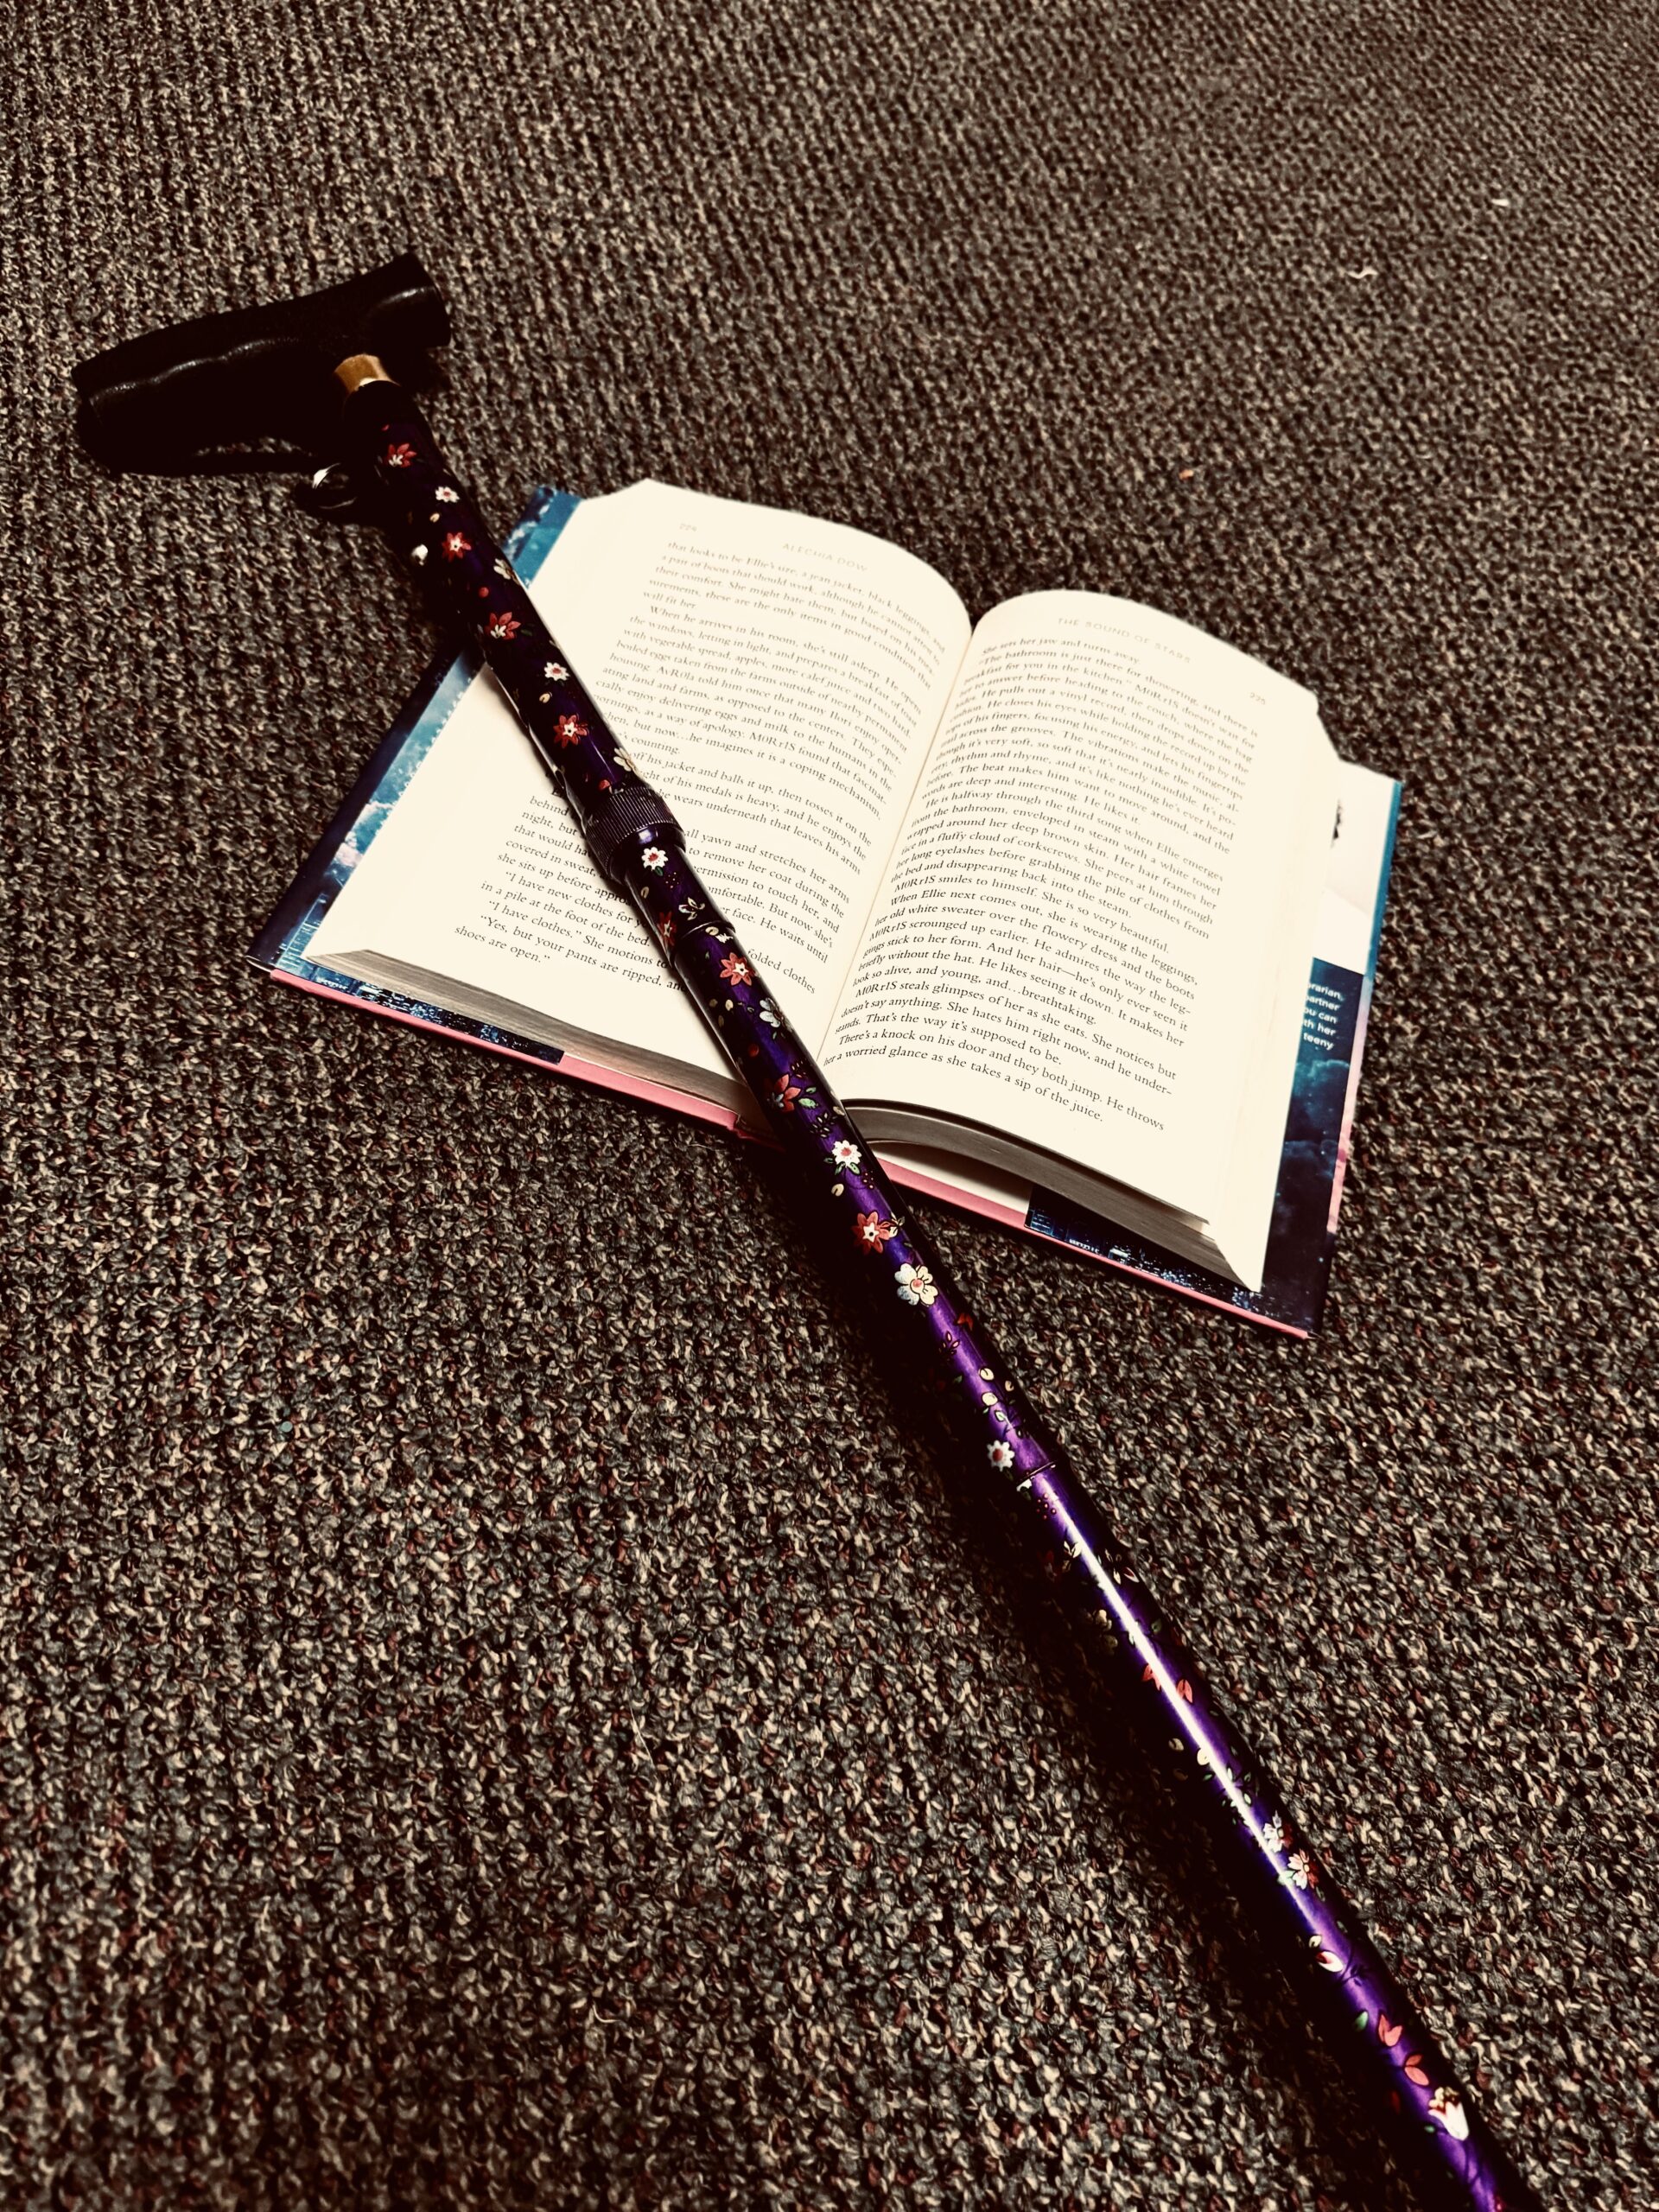 A walking cane is laid out over an open book on the floor.